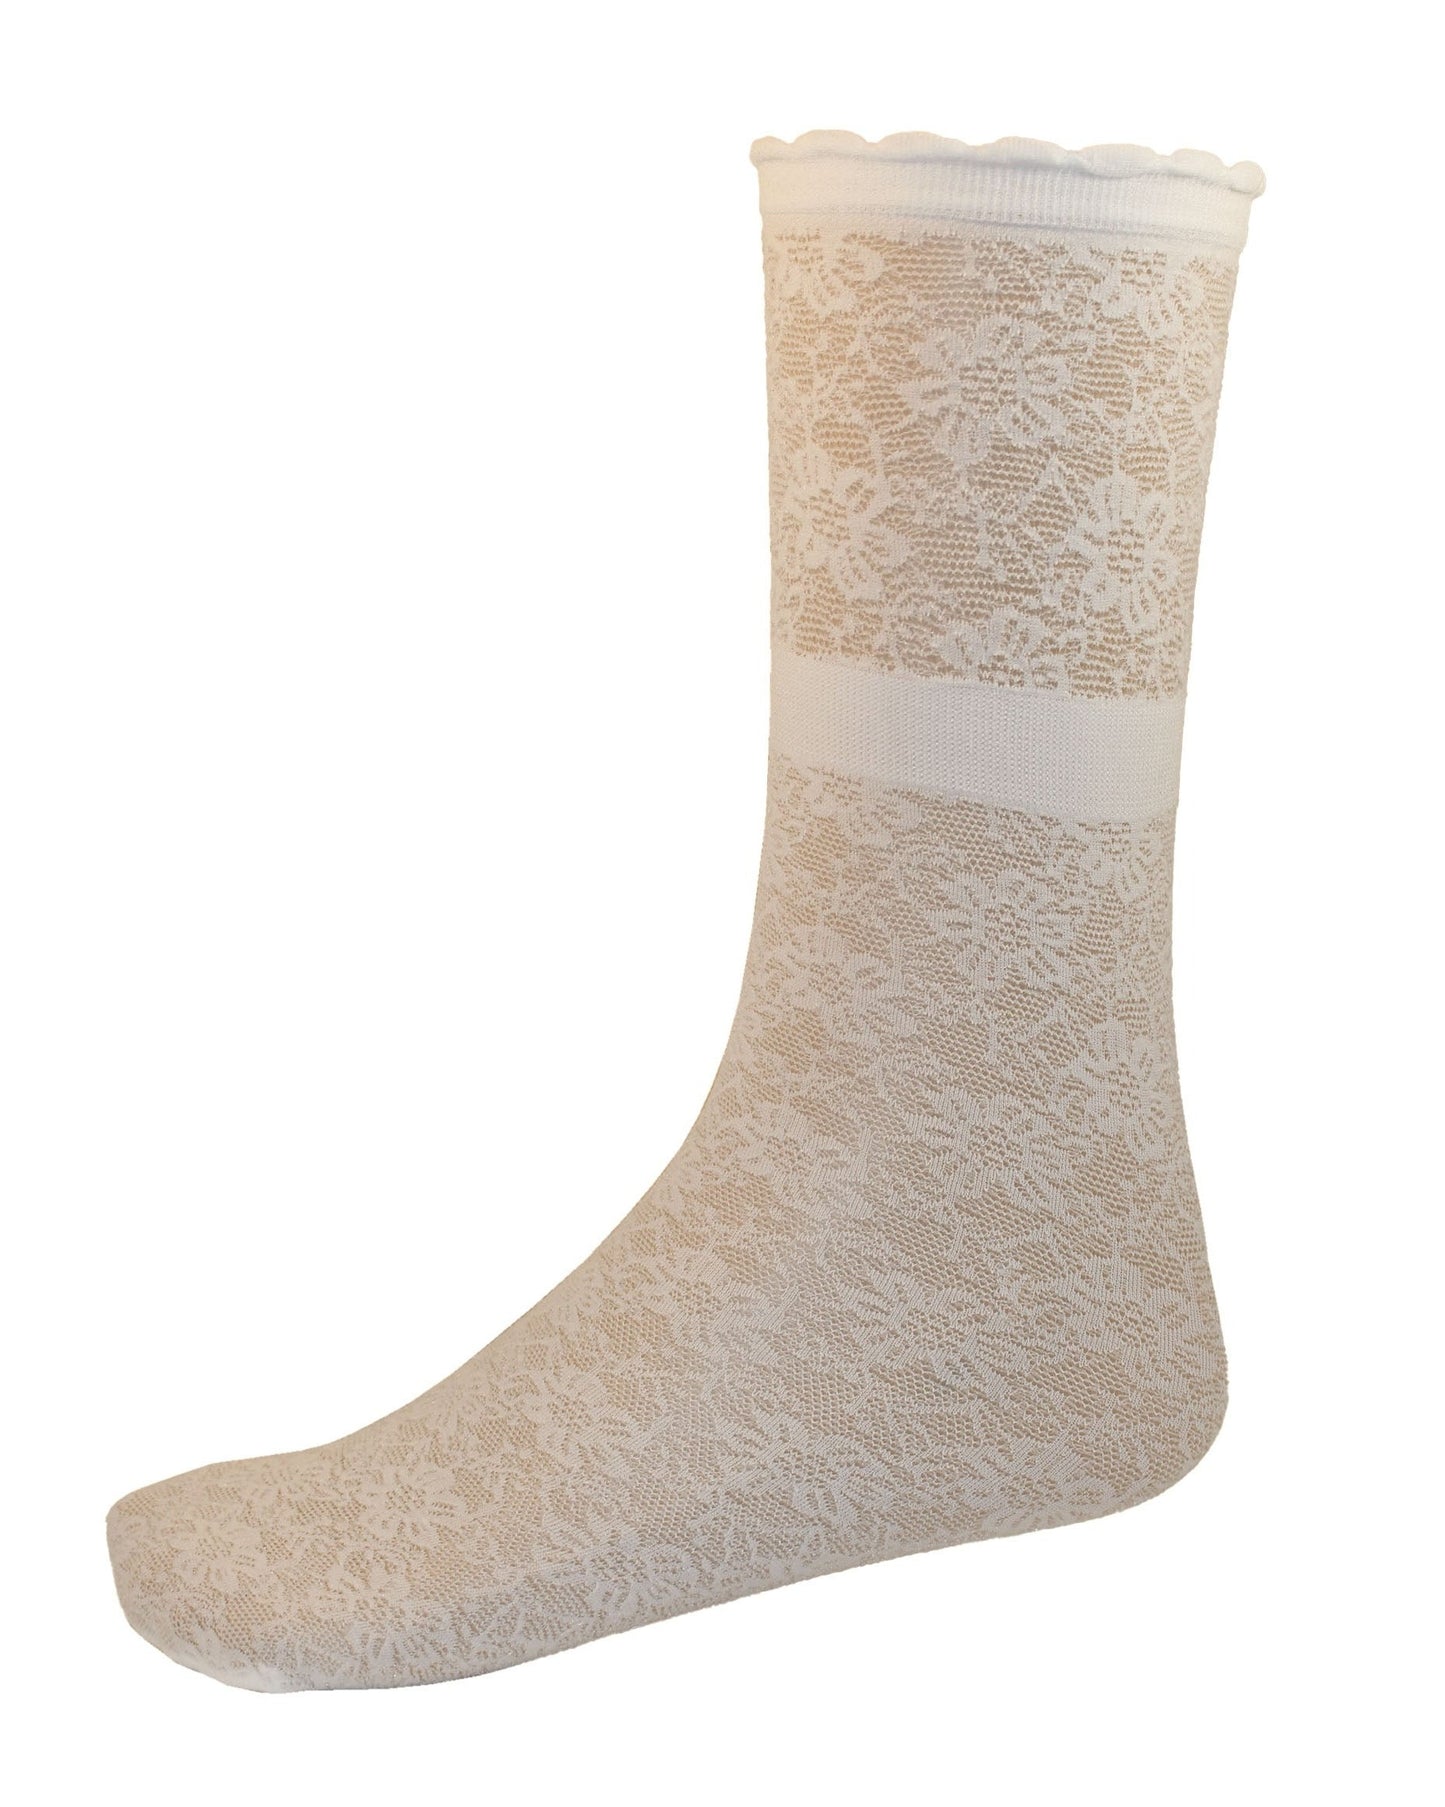 Omsa Suzette Calzino - Sheer white children's fashion ankle socks with a floral lace pattern, scalloped cuff with the option to scrunch down cuff to create a ruched look.